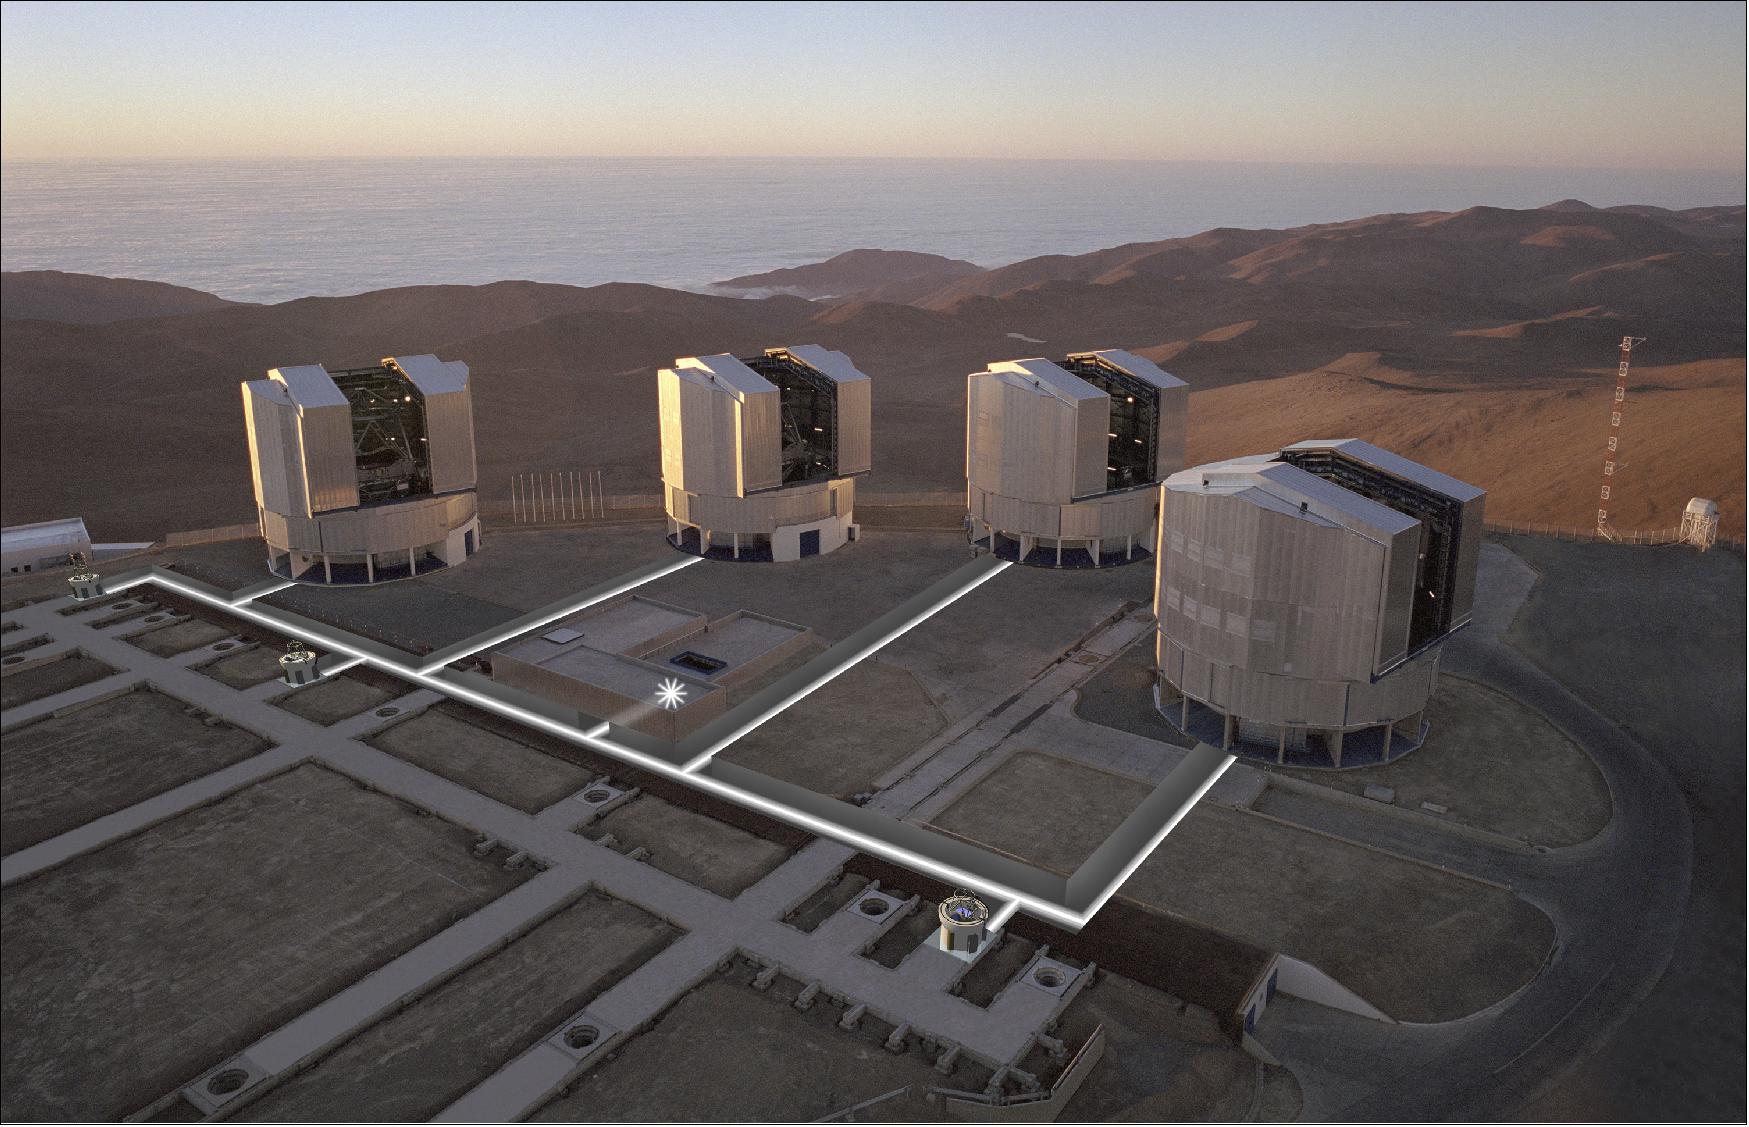 Figure 1: Aerial view of the observing platform on the top of Cerro Paranal, with the four enclosures for the 8.2-m UTs (Unit Telescopes) and various installations for the VLT Interferometer (VLTI). Three 1.8 m VLTI ATs (Auxiliary Telescopes) and paths of the light beams have been superimposed on the photo. Also seen are some of the 30 "stations" where the ATs will be positioned for observations and from where the light beams from the telescopes can enter the Interferometric Tunnel below. The straight structures are supports for the rails on which the telescopes can move from one station to another. The Interferometric Laboratory (partly subterranean) is at the center of the platform (image credit: ESO)